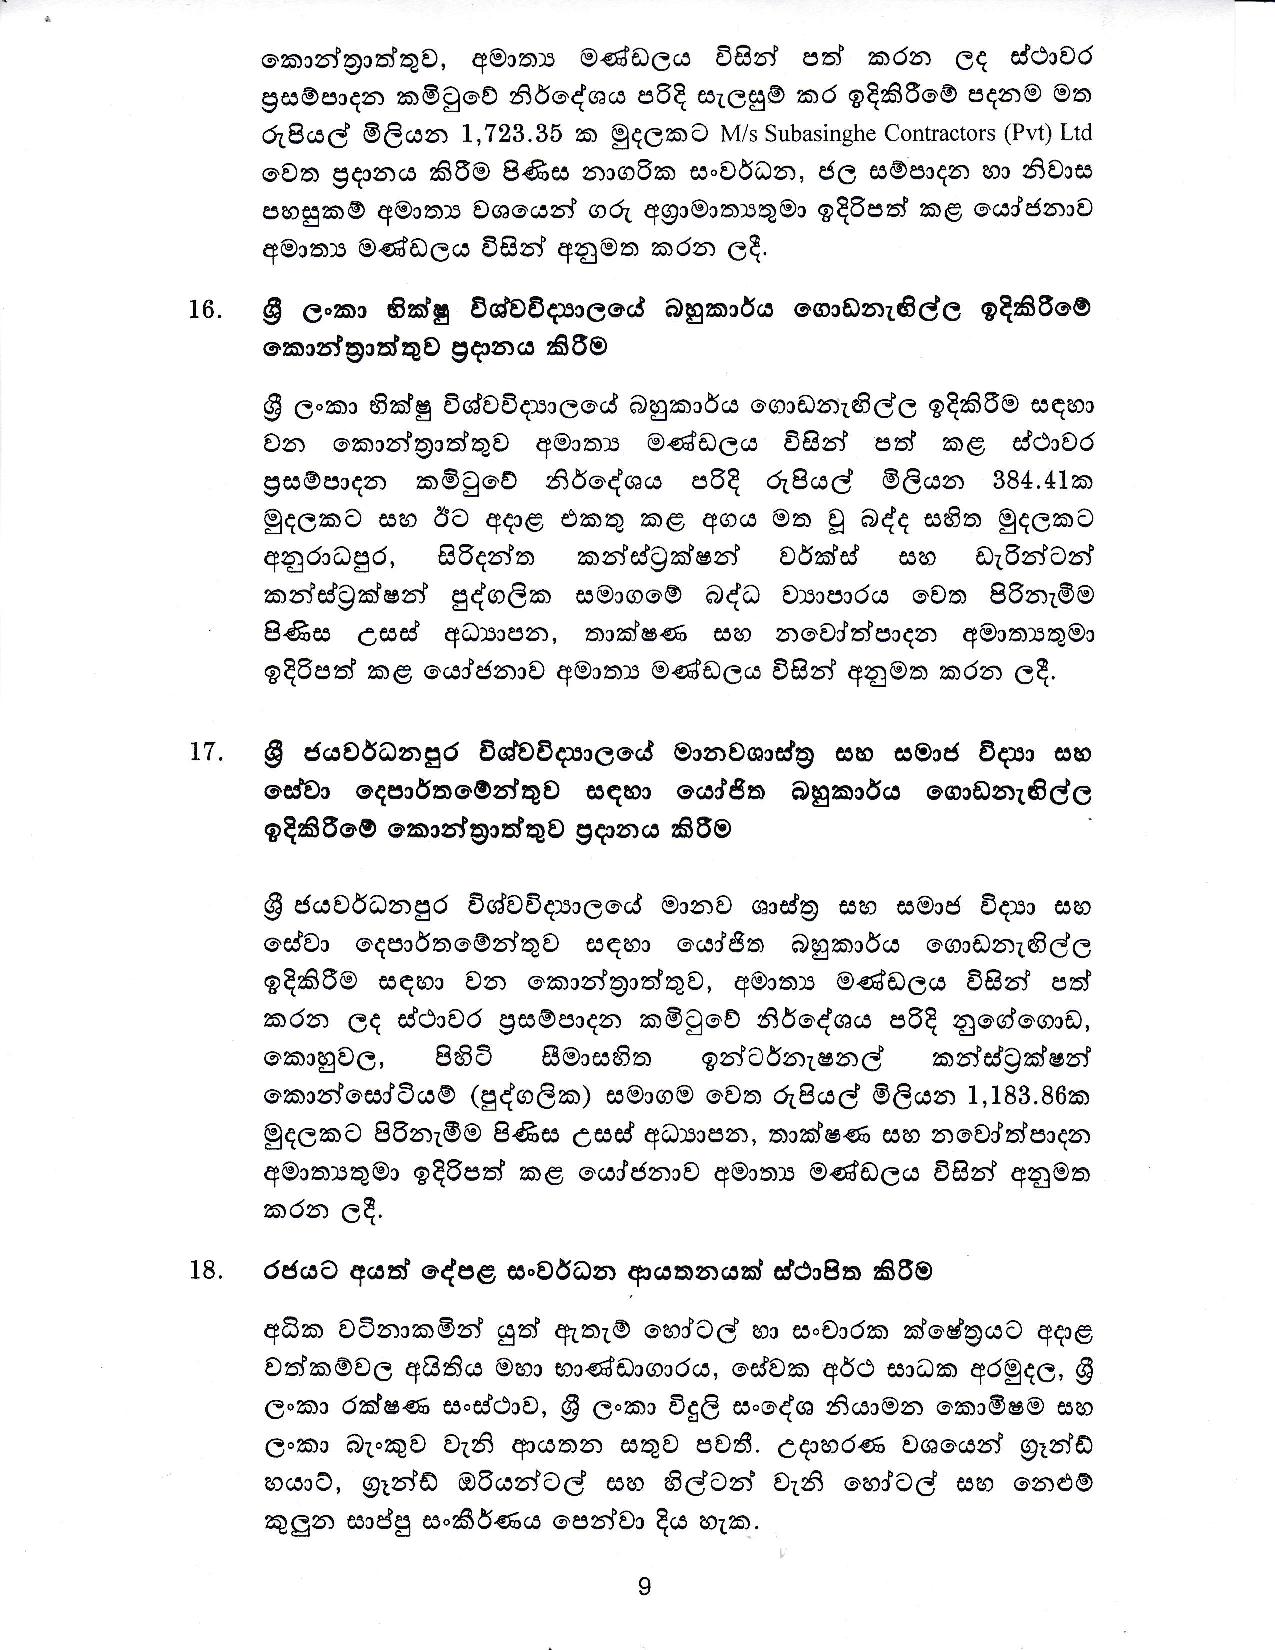 Cabinet Decision on 04.03.2020 page 009